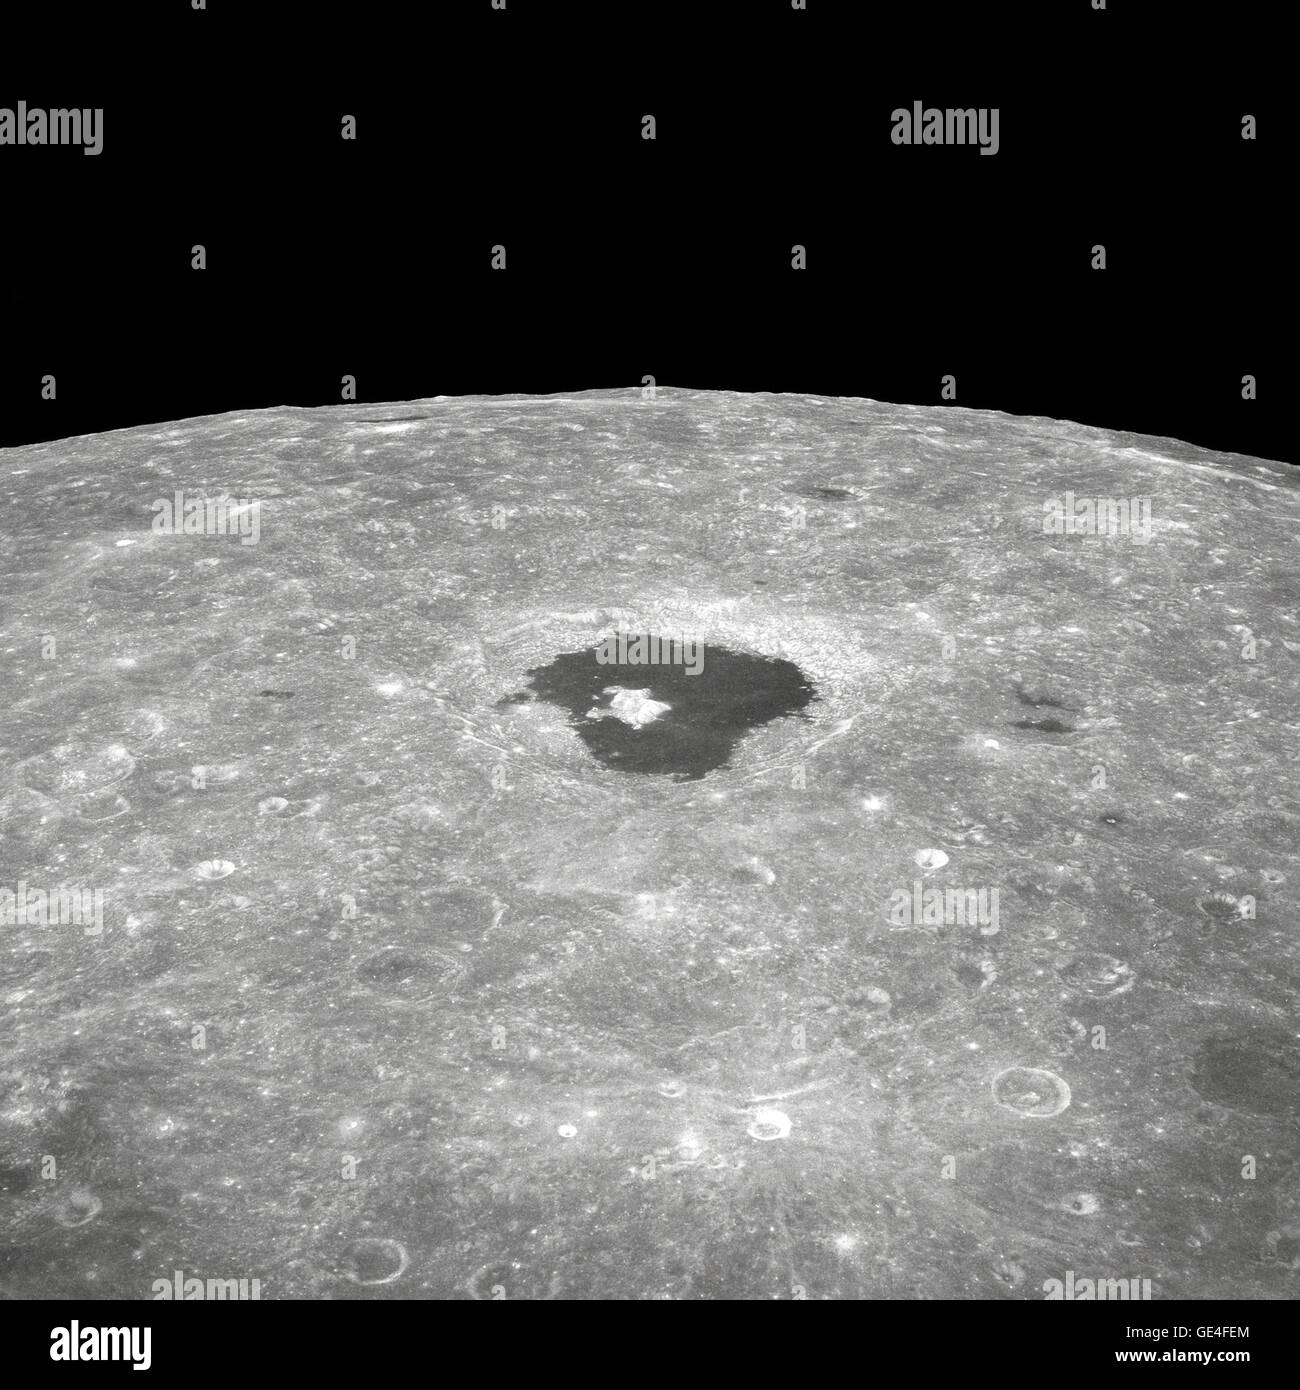 (December 24, 1968) This is a view of the large crater Tsiolkovsky as photographed by the astronauts during the Apollo 8 lunar orbit mission, looking East toward the lunar horizon. Tsiolkovsky is approximately 150 statute miles in diameter. It was first identified and named by the Russians from photographs taken by their unmanned Luna III spacecraft  Image # : AS8-12-2196 Stock Photo